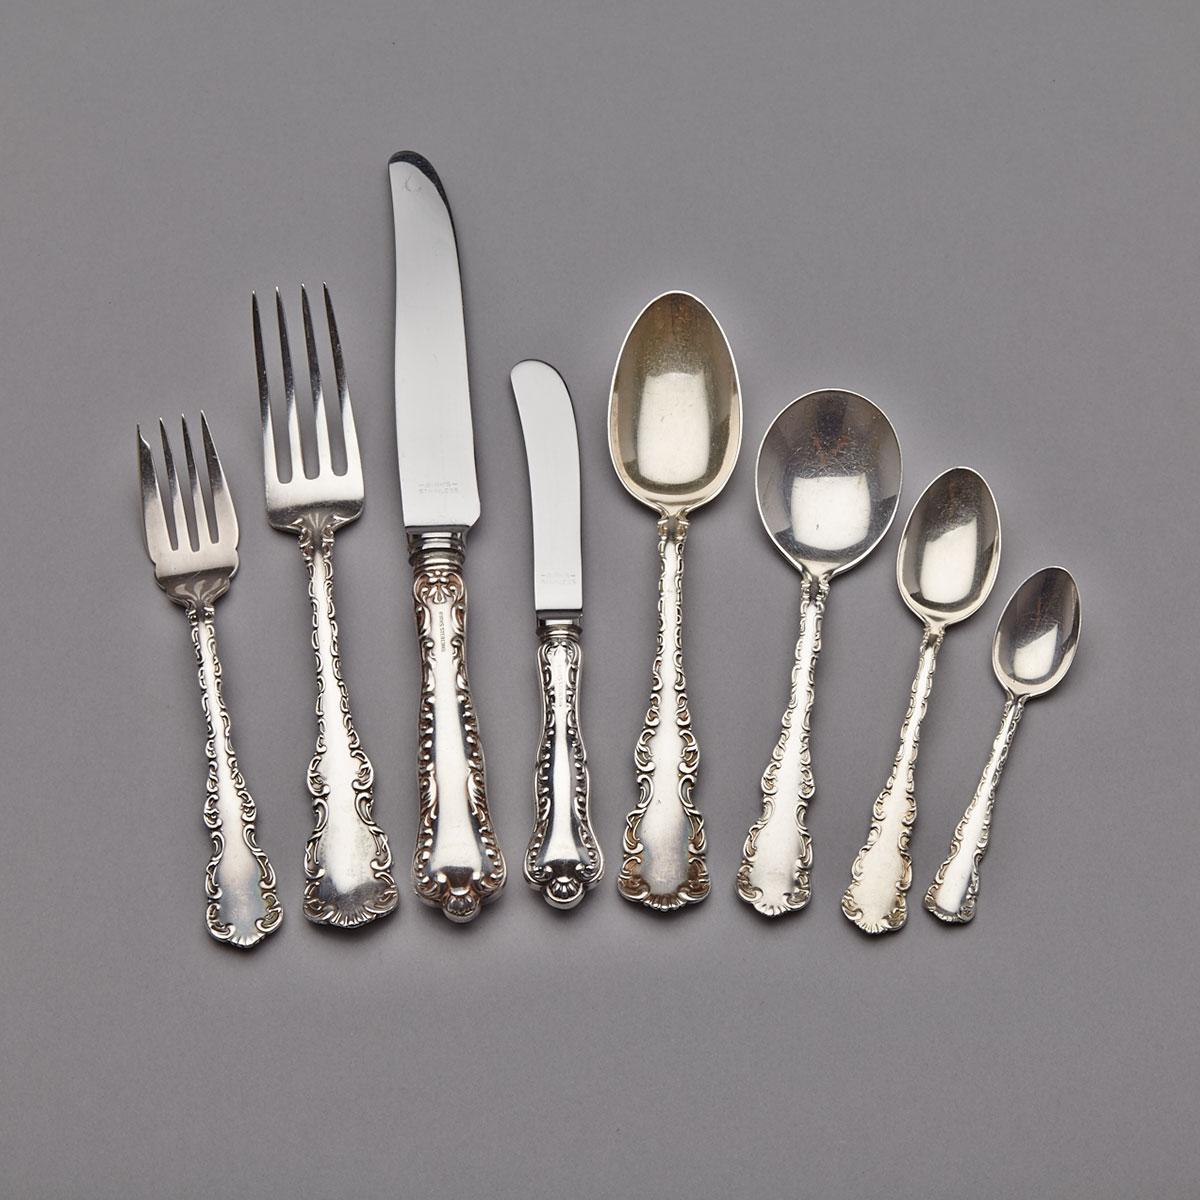 Canadian Silver Assembled ‘Louis XV’ and ‘Pompadour’ Pattern Flatware Service, Henry Birks & Sons, Montreal, Que., 20th century